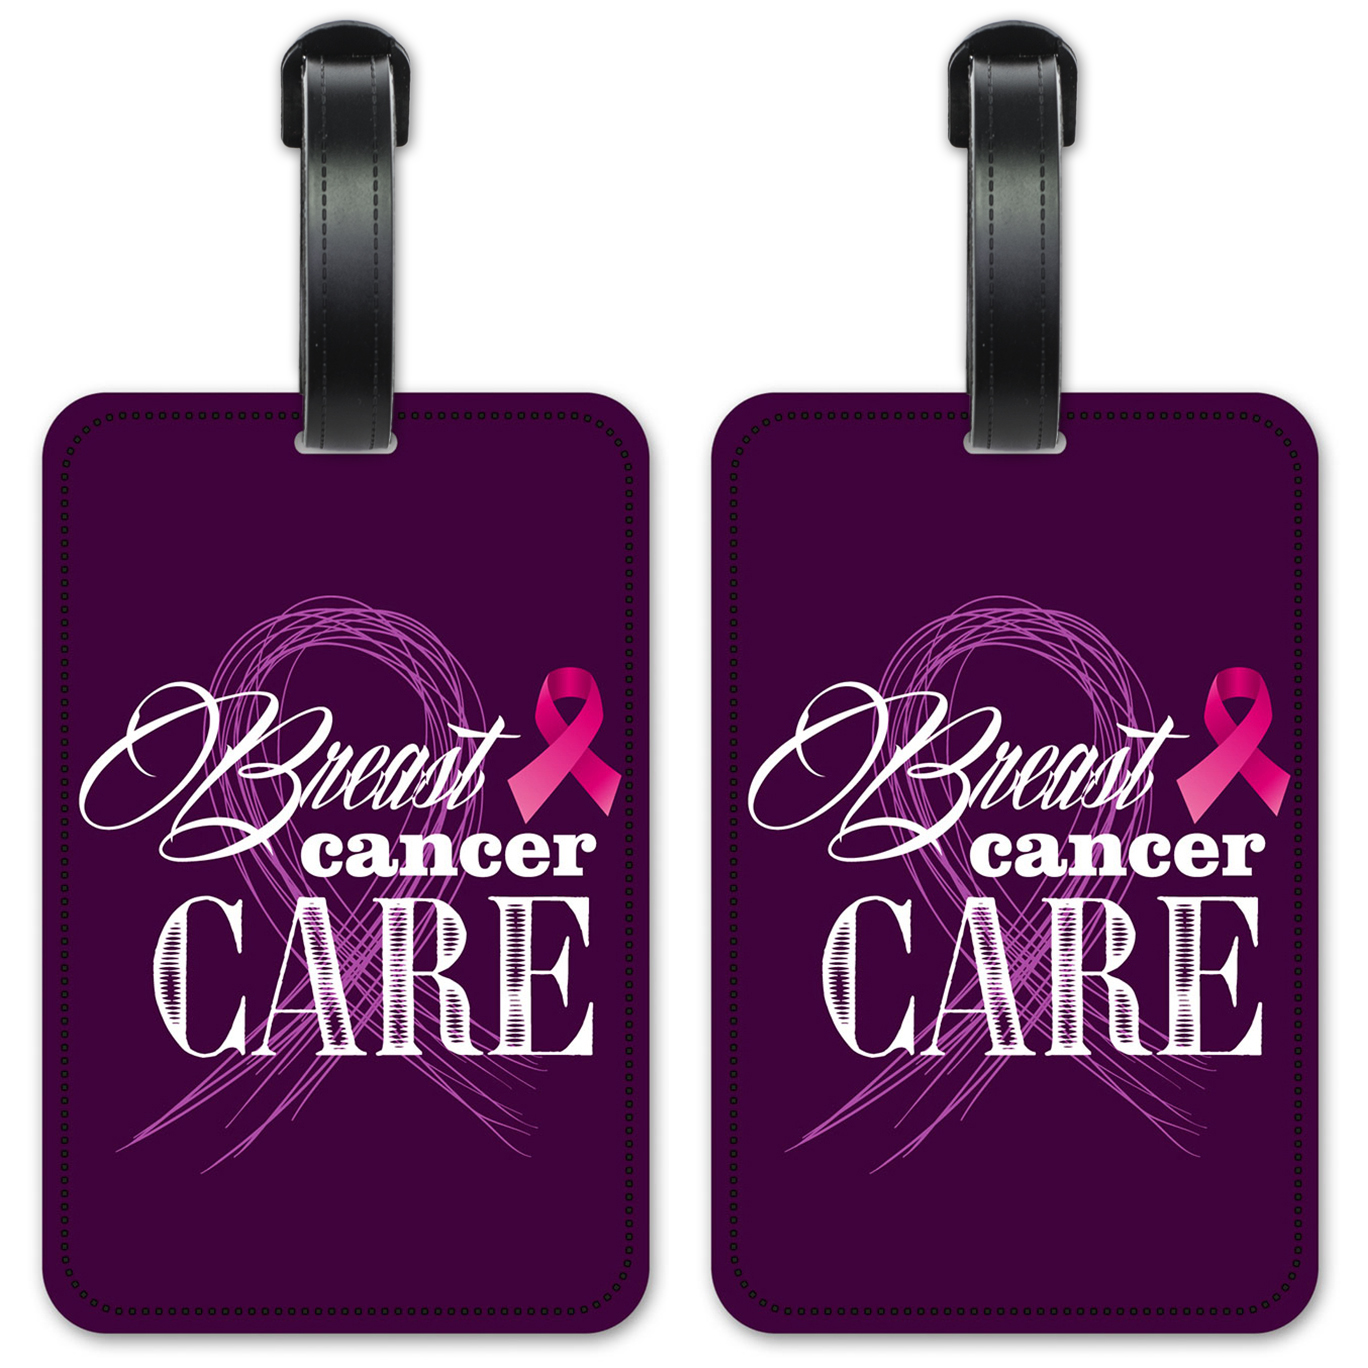 Breast Cancer "Care" - #2568